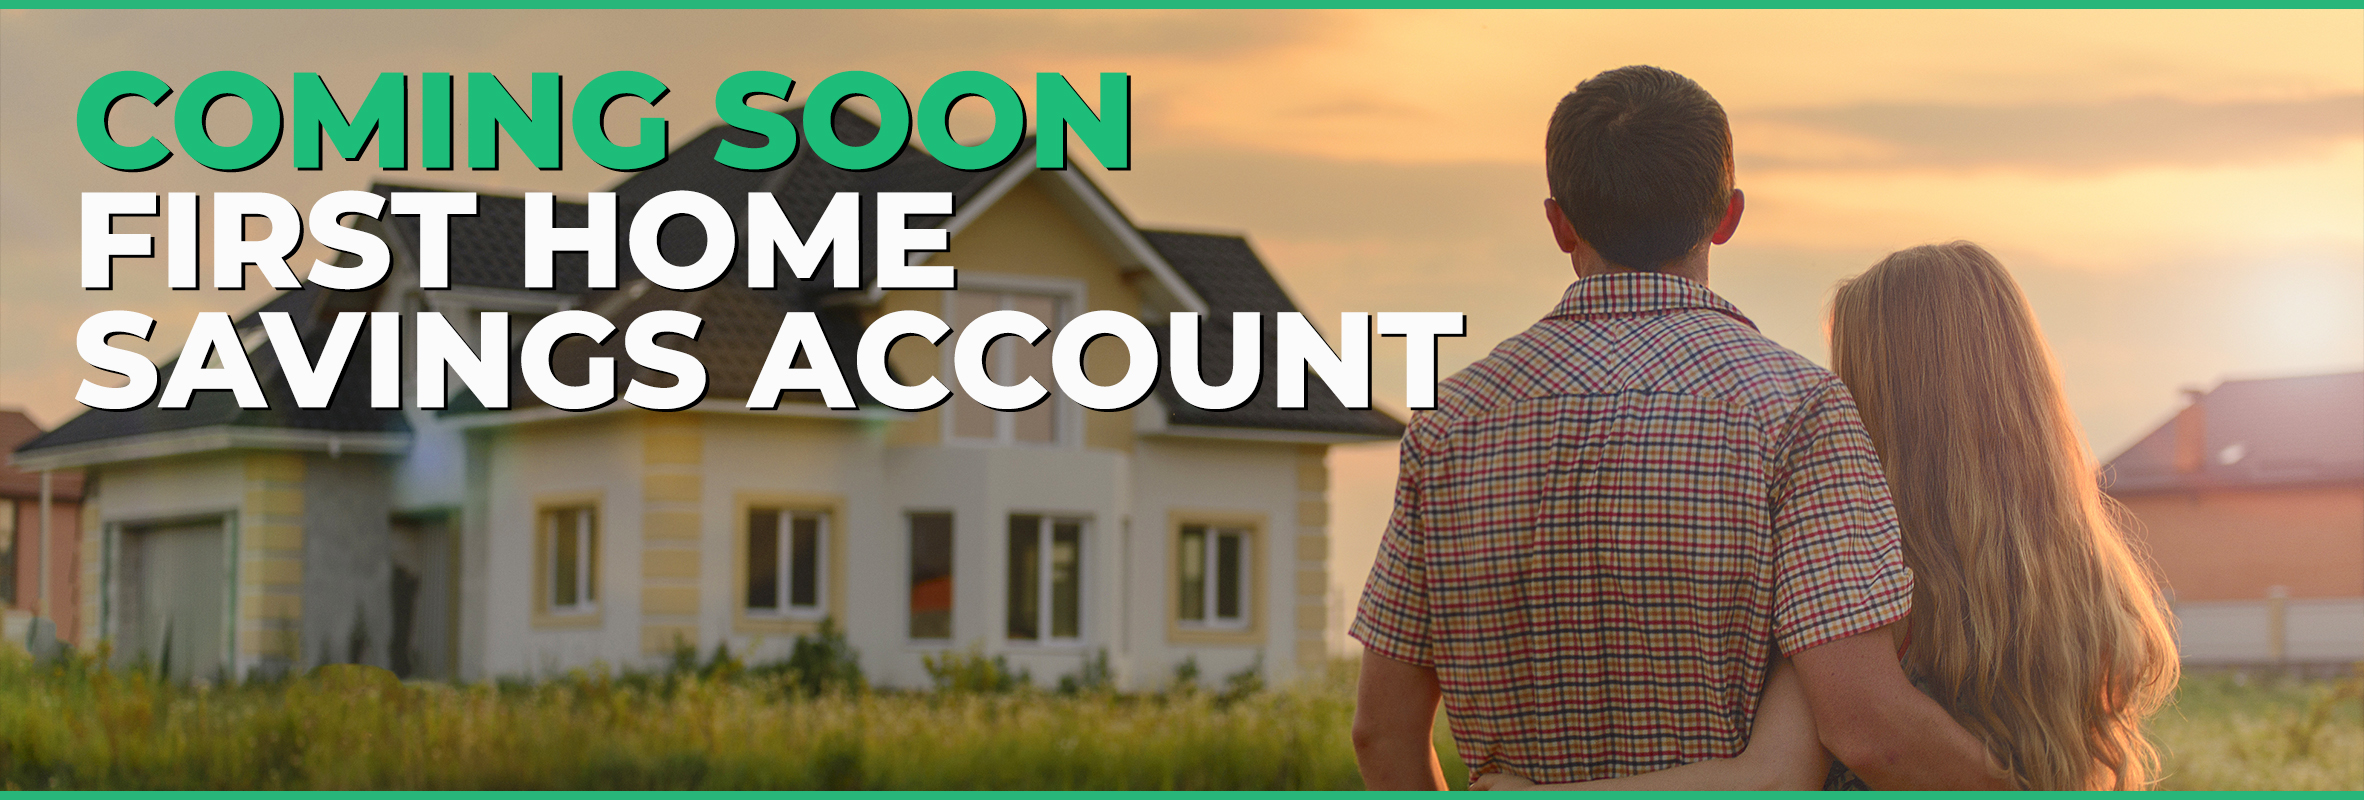 first home savings account coming soon